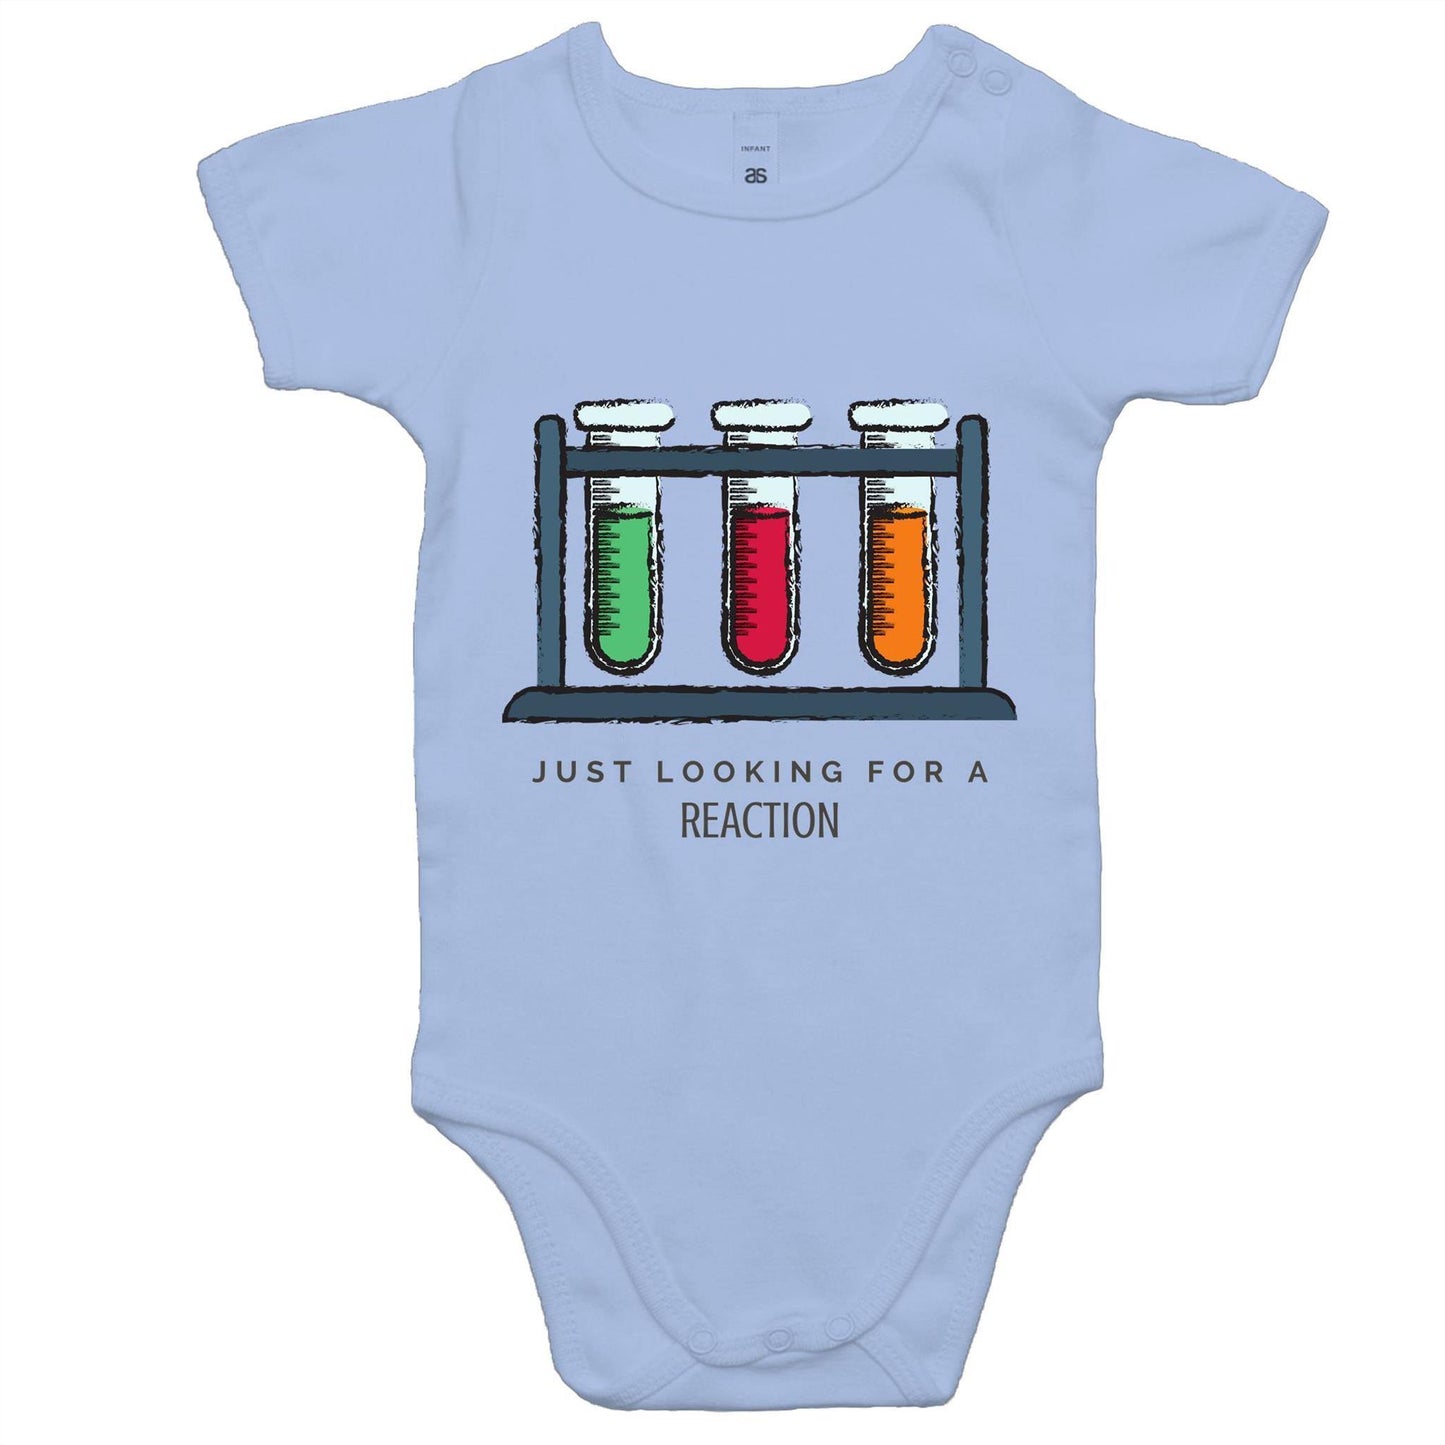 Test Tube, Just Looking For A Reaction - Baby Bodysuit Powder Blue Baby Bodysuit kids Science